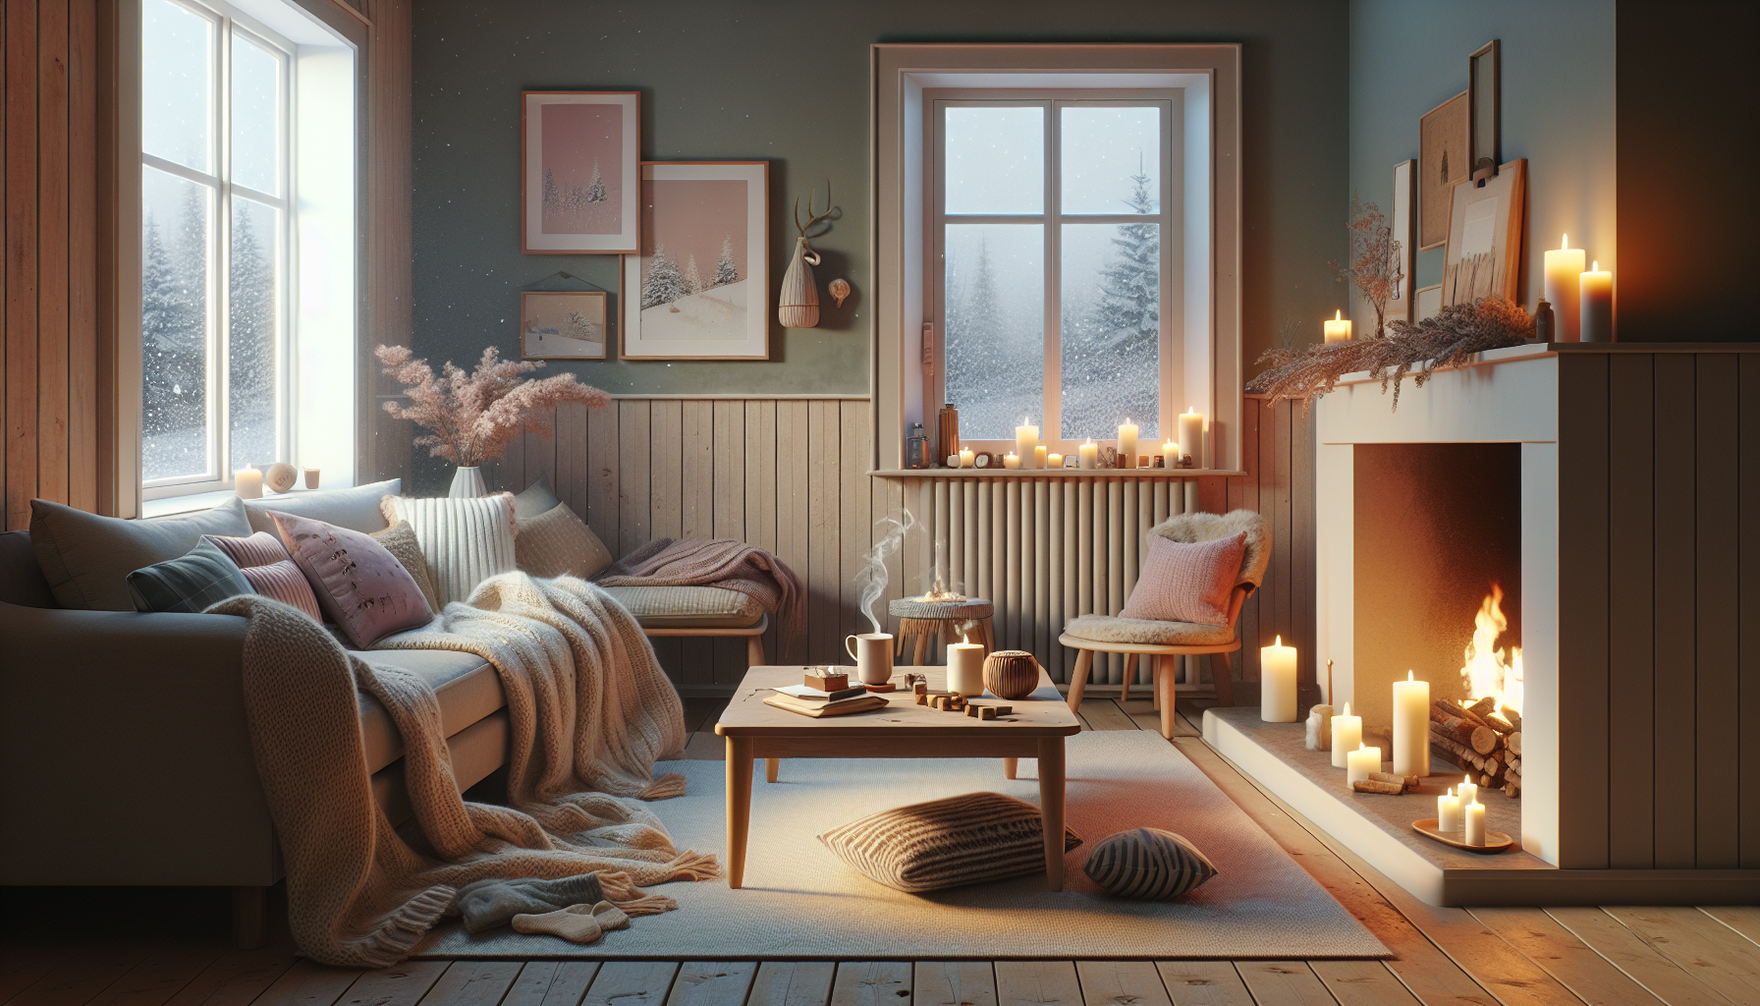 Depict the Danish concept of Hygge, characterized by a sense of cozy comfort. This scene unfolds in a typical Scandinavian living room. The walls are adorned with soft pastel colours, there is a plush